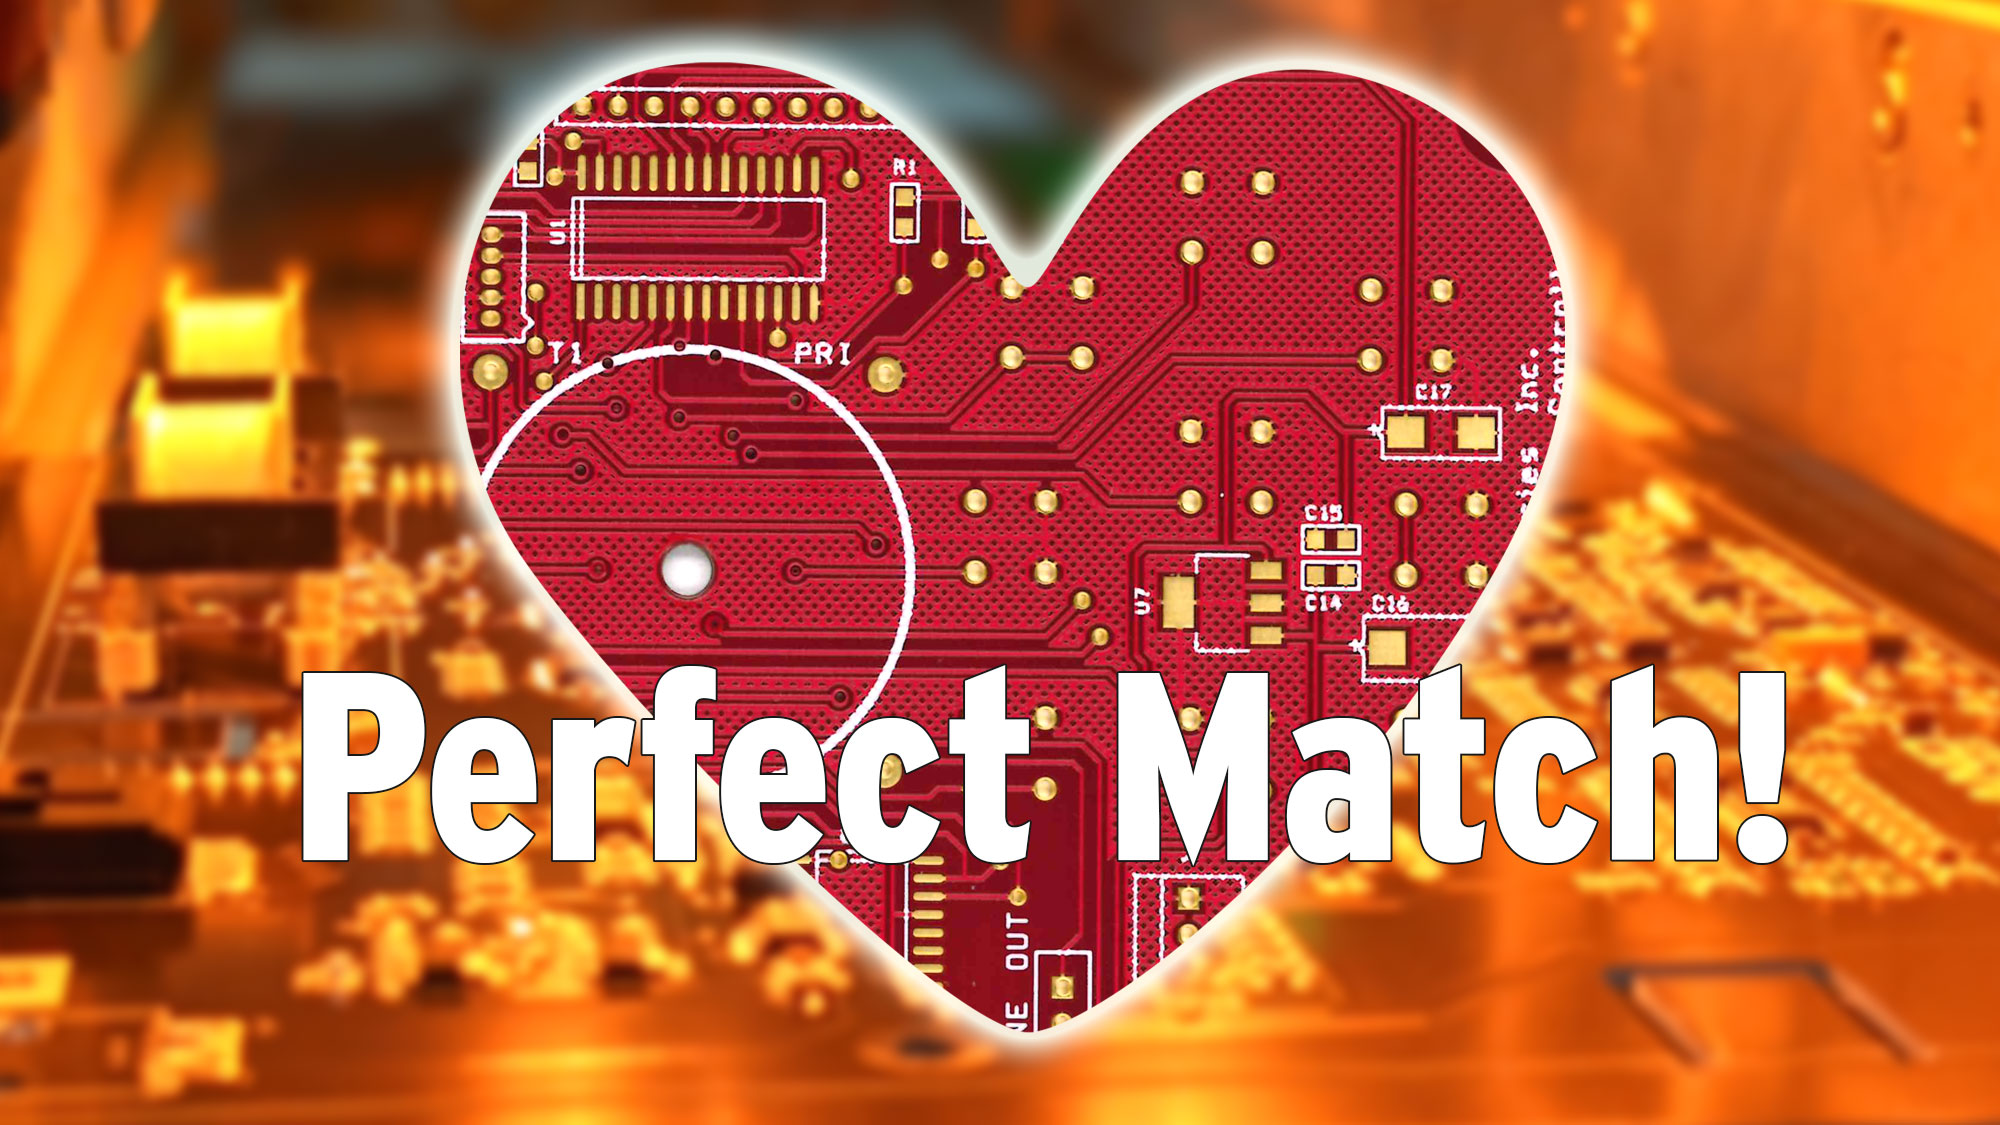 The perfect match - your PCBA and Pro-Active Engineering